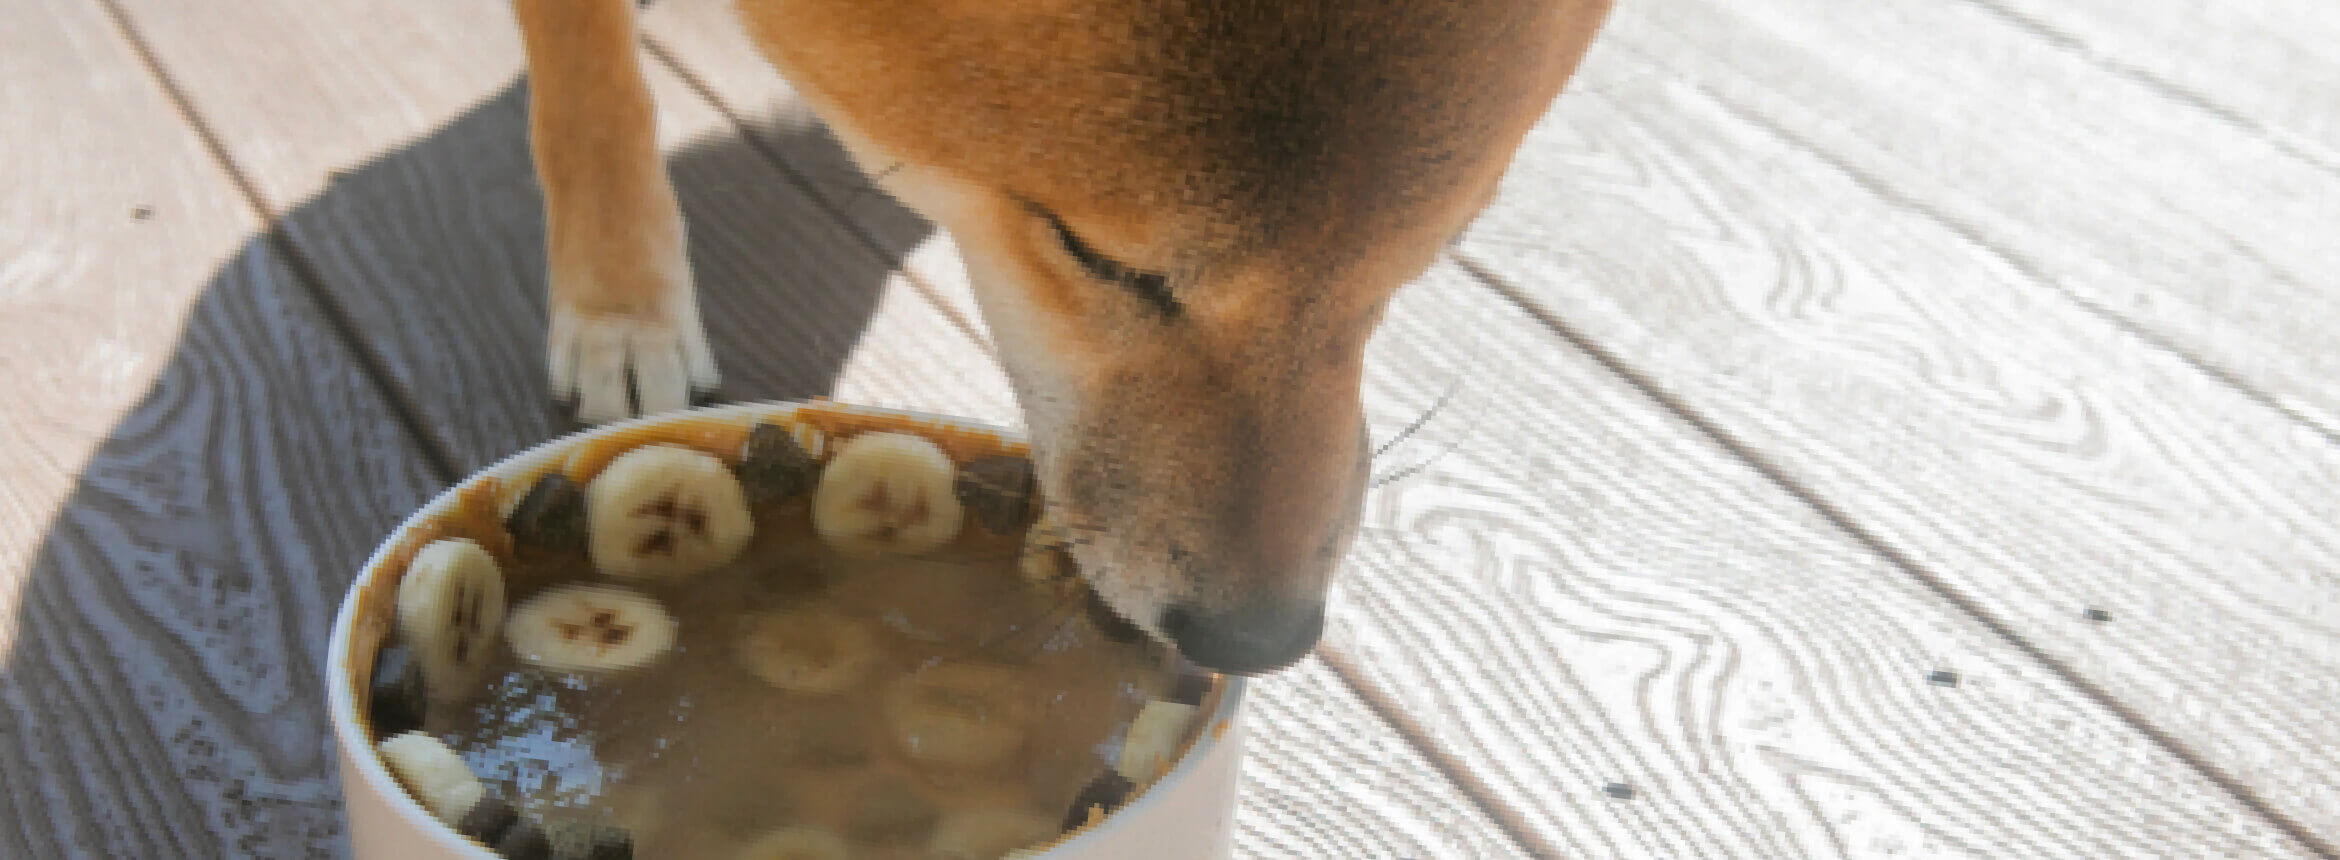 BLUE Bits - A dog enjoying a Blue Bits meal from a bowl filled with bananas.